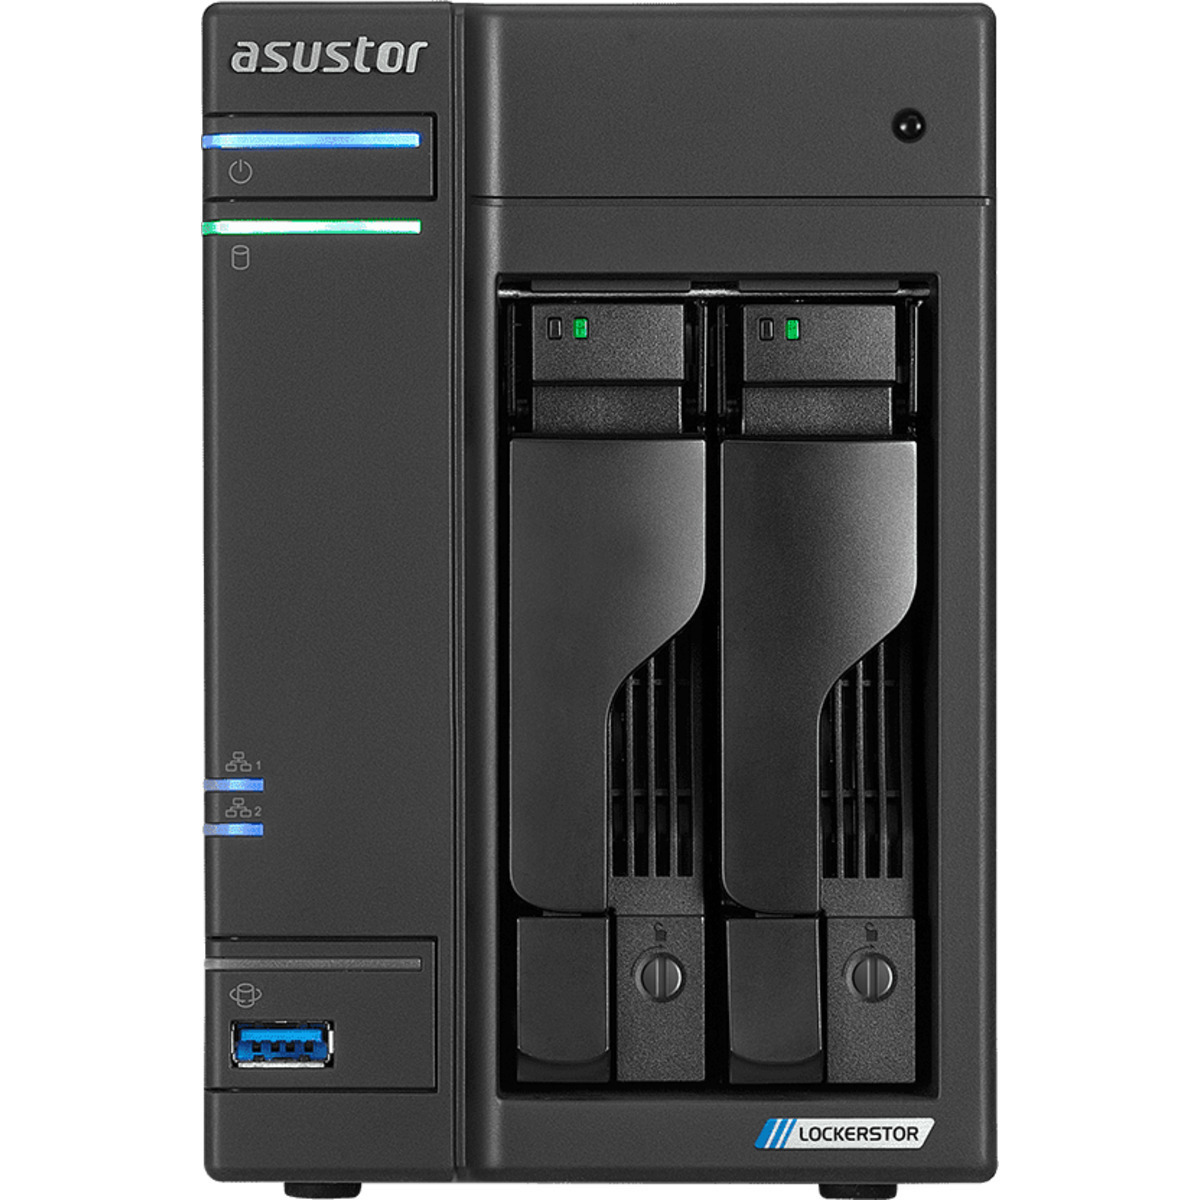 buy $1075 ASUSTOR AS6602T Lockerstor 2 2tb Desktop NAS - Network Attached Storage Device 2x1000gb Samsung 860 PRO MZ-76P1T0BW 2.5 SATA 6Gb/s SSD ENTERPRISE Class Drives Installed - Burn-In Tested - FREE RAM UPGRADE - nas headquarters buy network attached storage server device das new raid-5 free shipping usa christmas new year holiday sale AS6602T Lockerstor 2